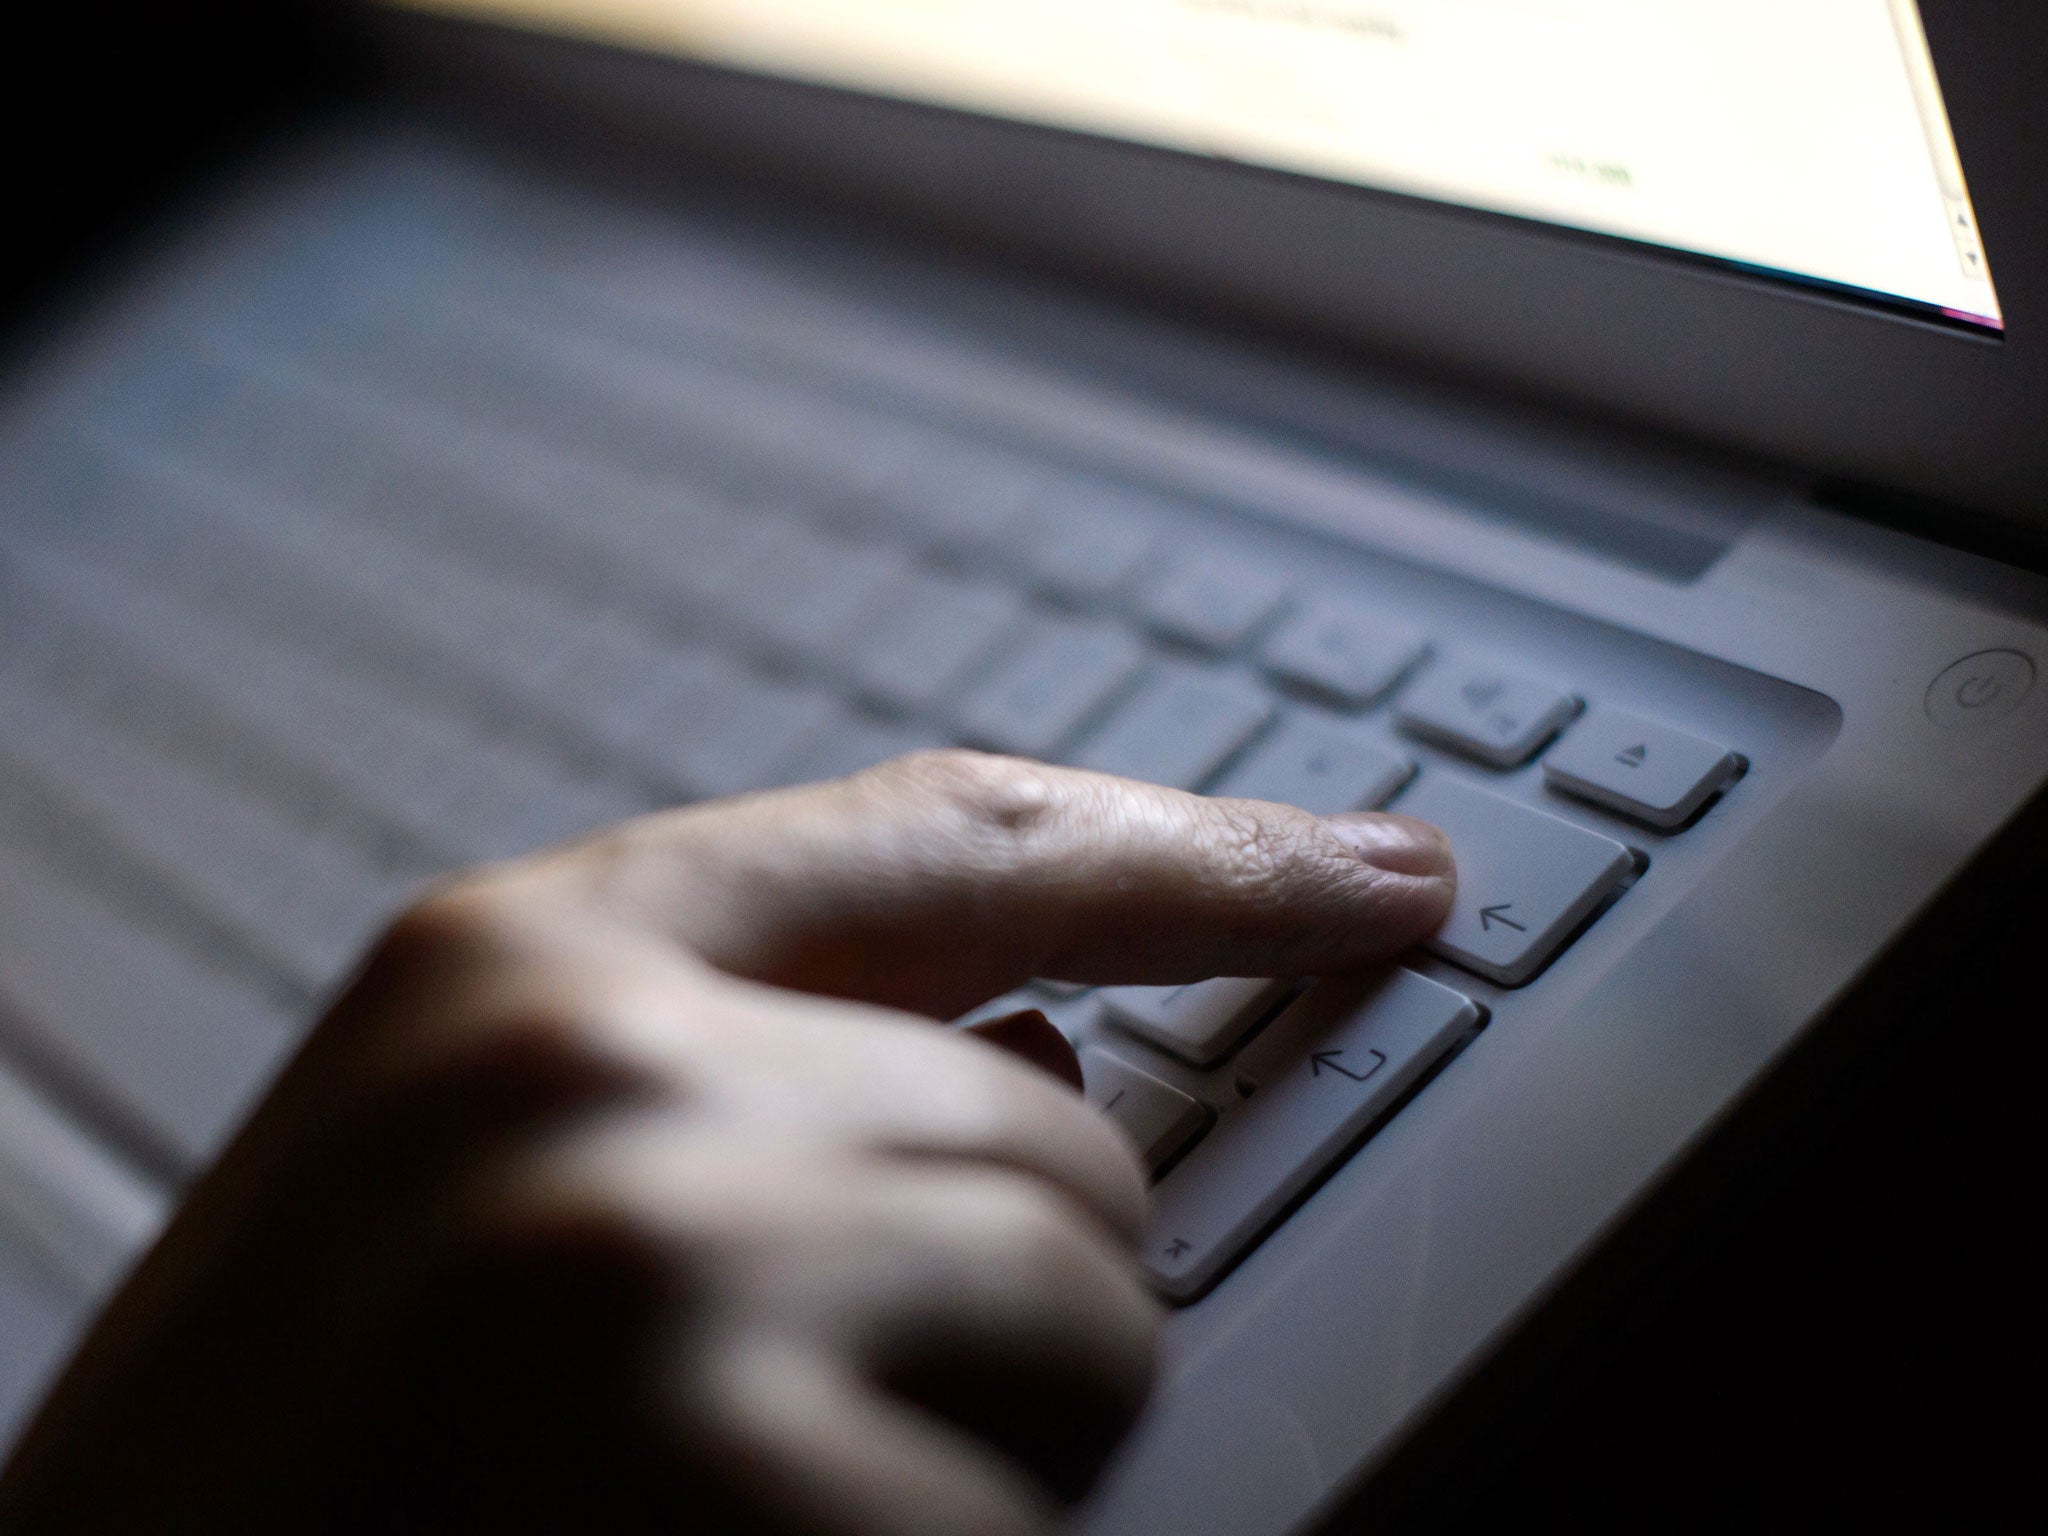 Nearly six million fraud and cyber crimes have been committed in the past year